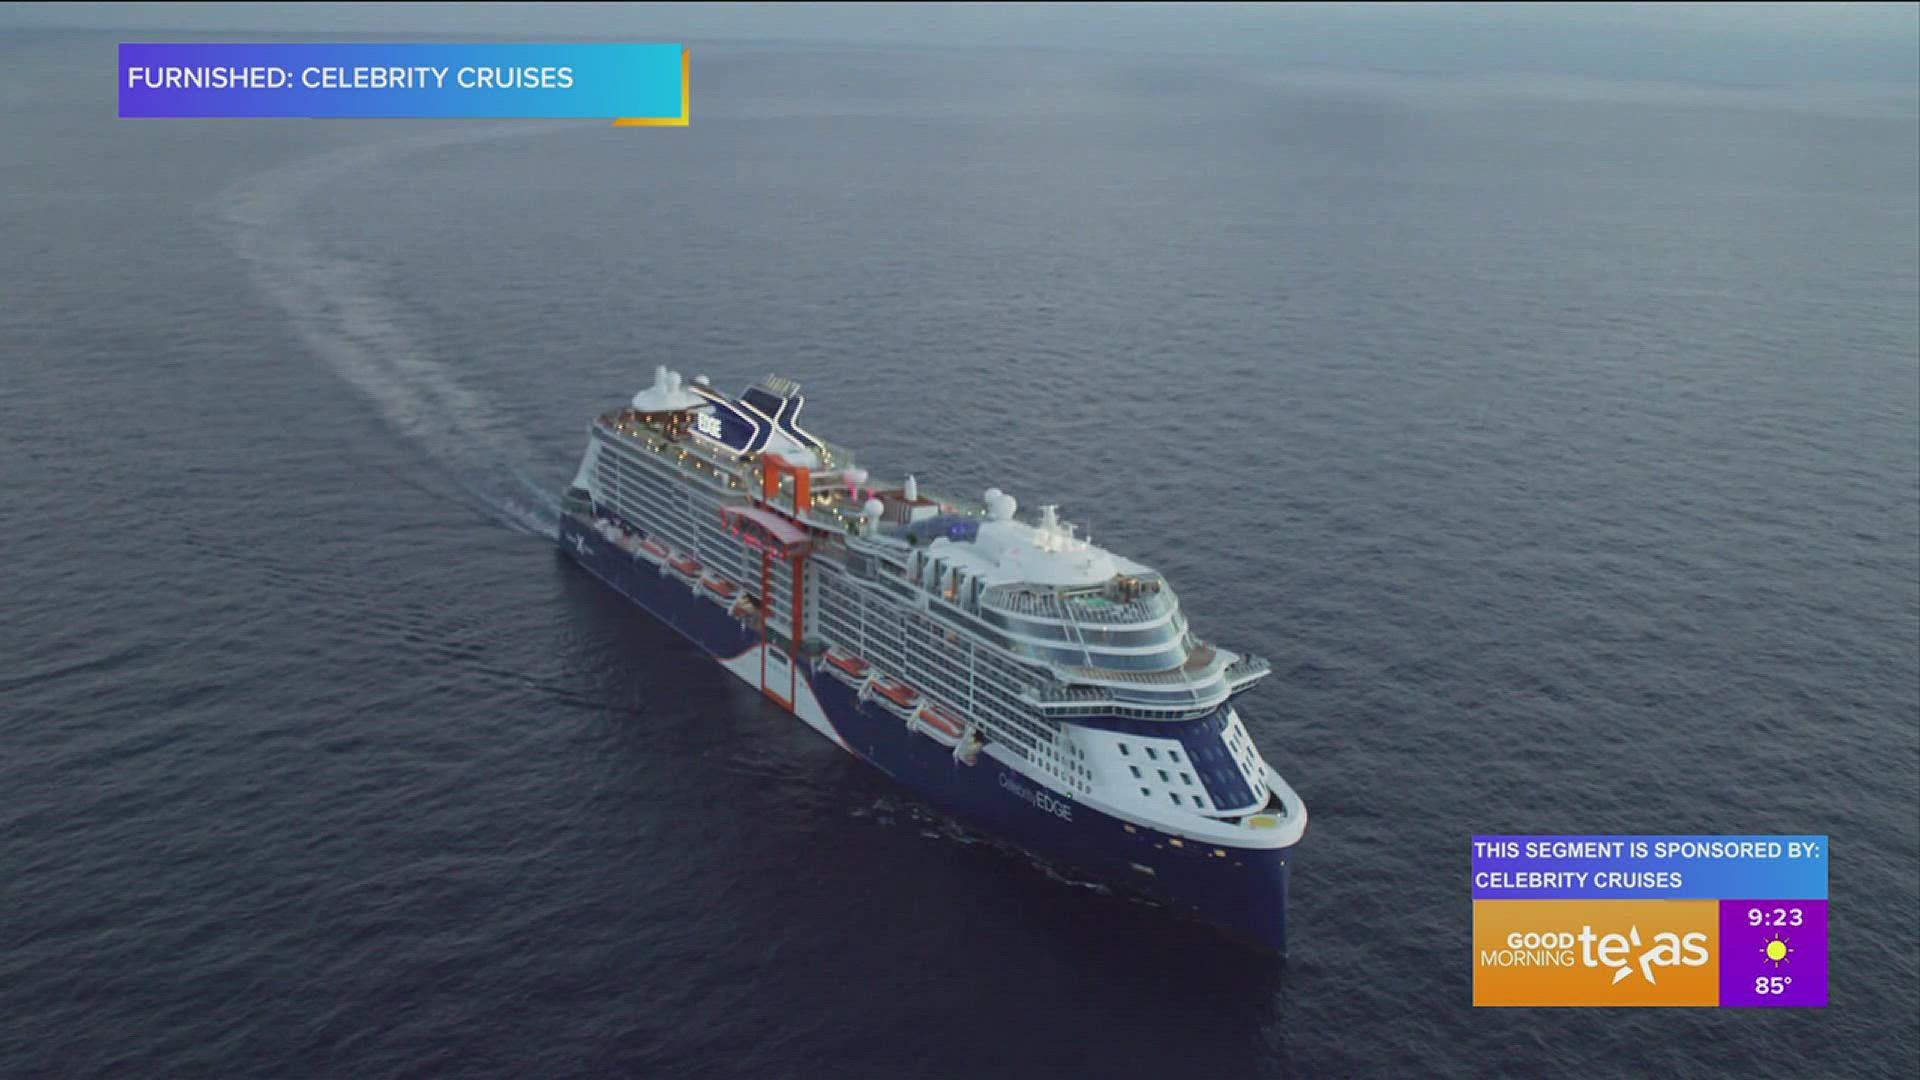 This segment is sponsored by: Celebrity Cruises